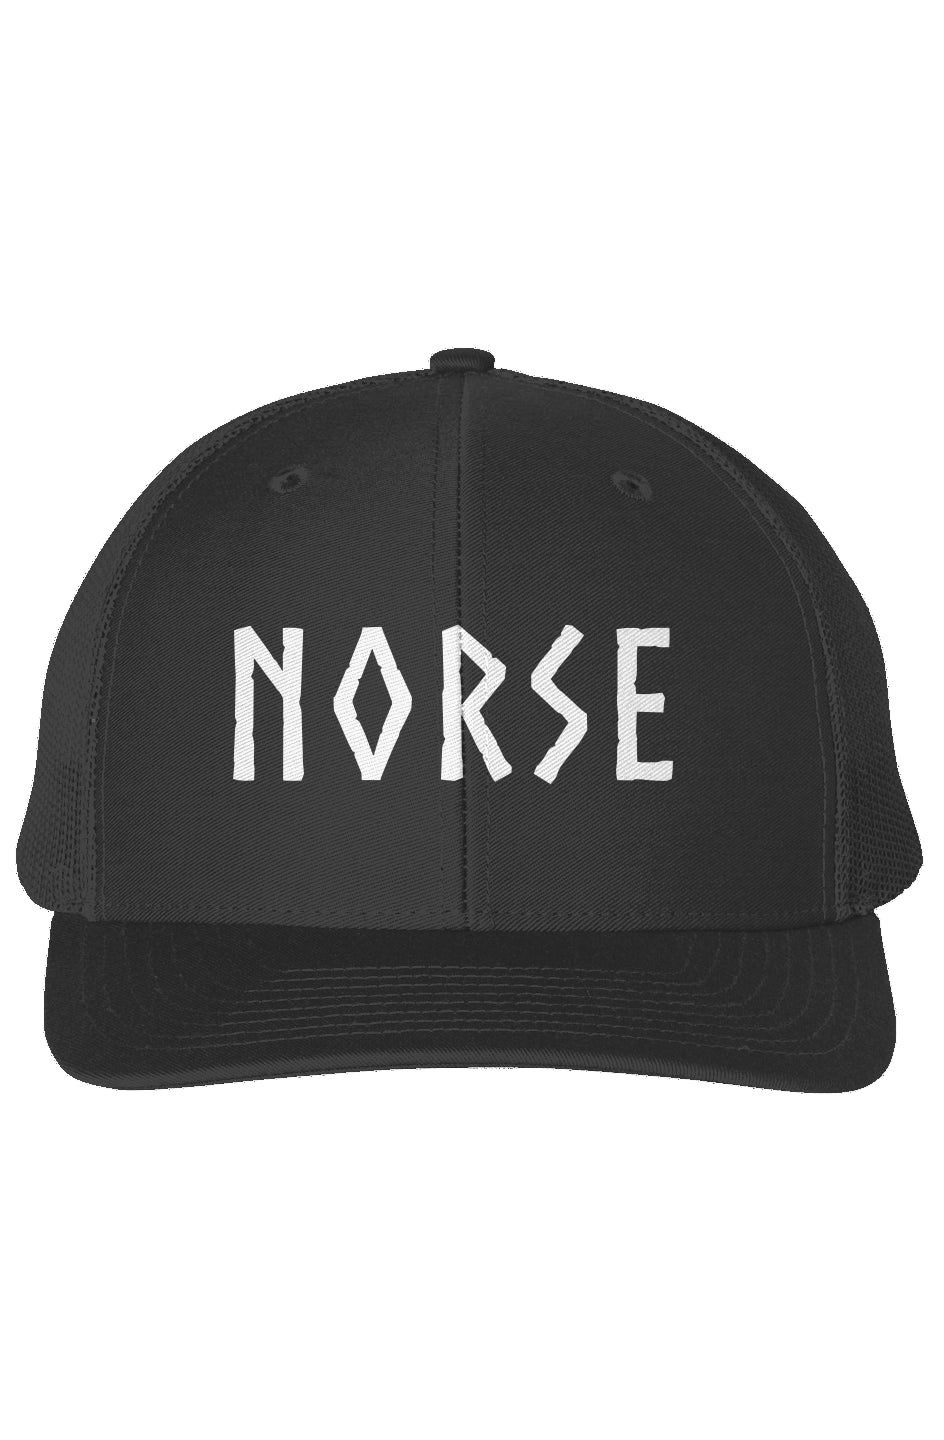 Embroidered Richardson 112 Snapback Trucker Hat Black | Norse Hockey Letters